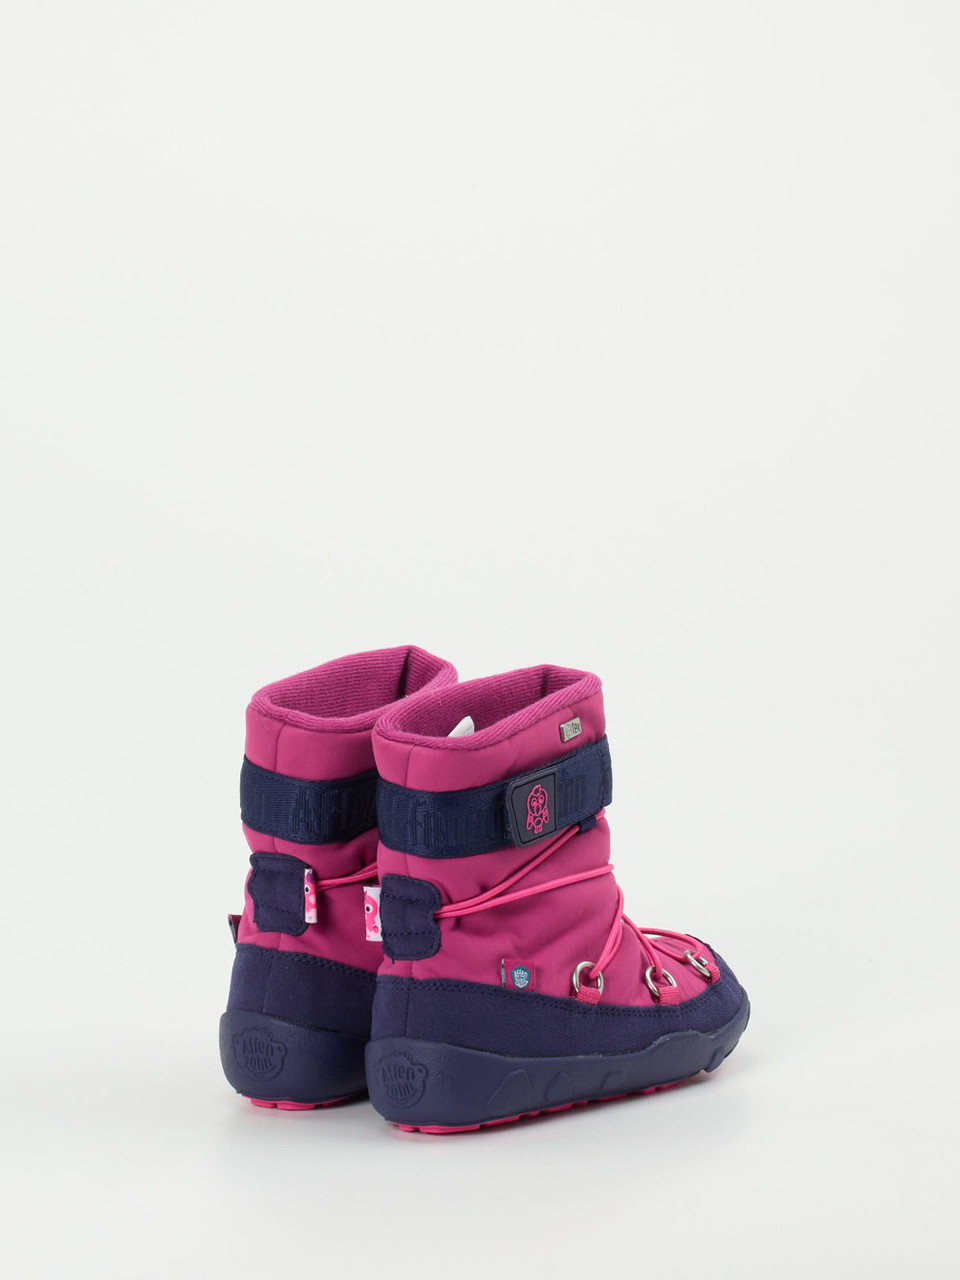 Boots pink 6800549000303